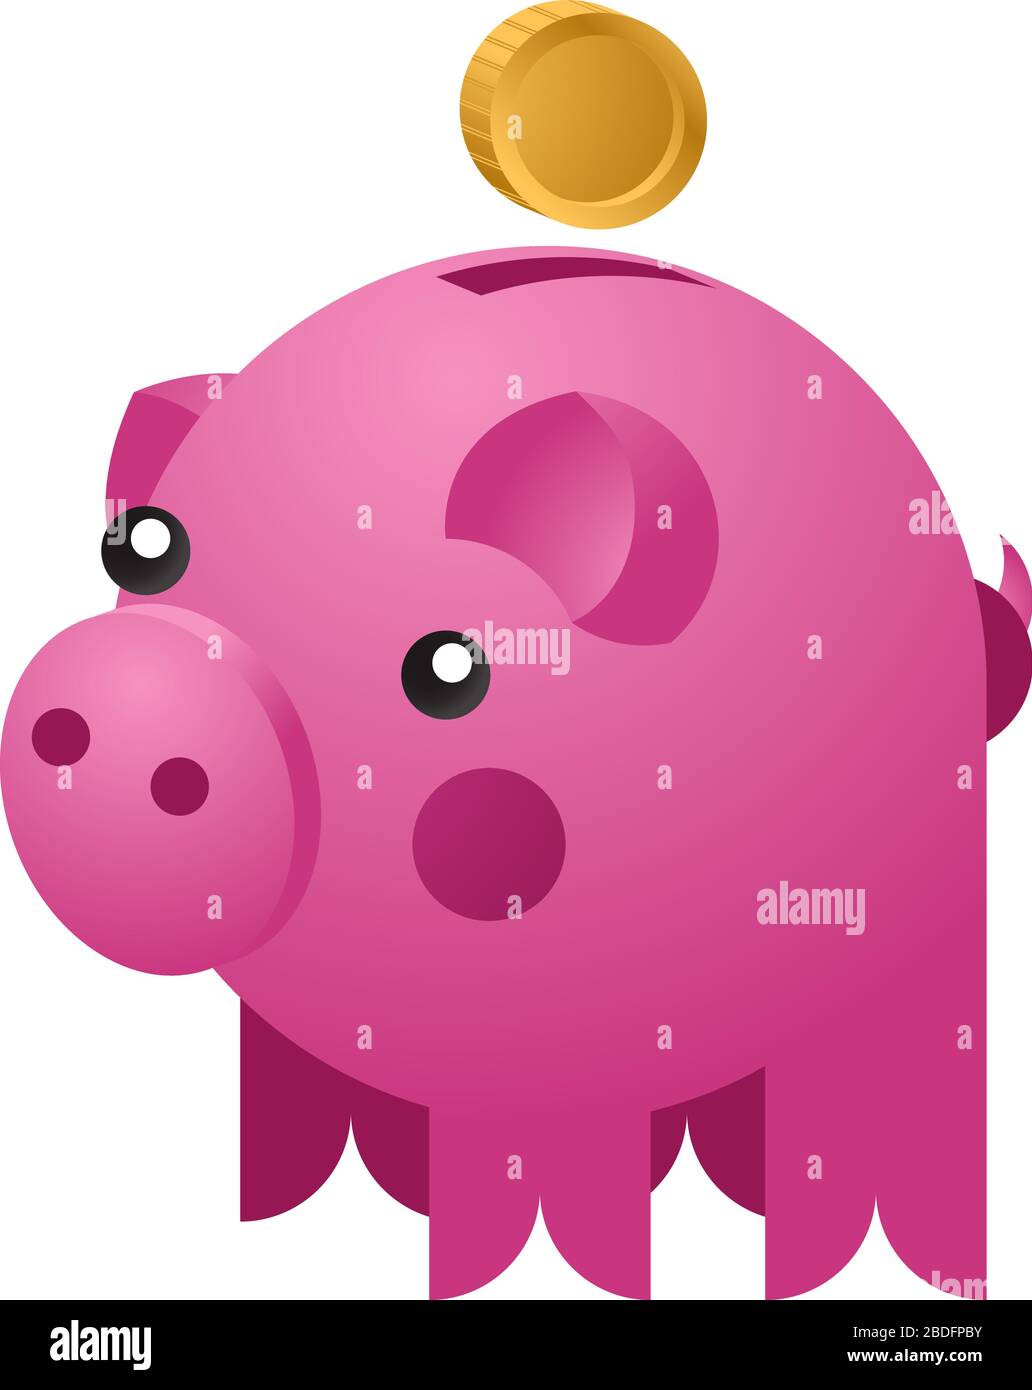 Moneybox in the form of ceramic pig with a coins falling into it. Concept of saving money. Vector illustration Stock Vector